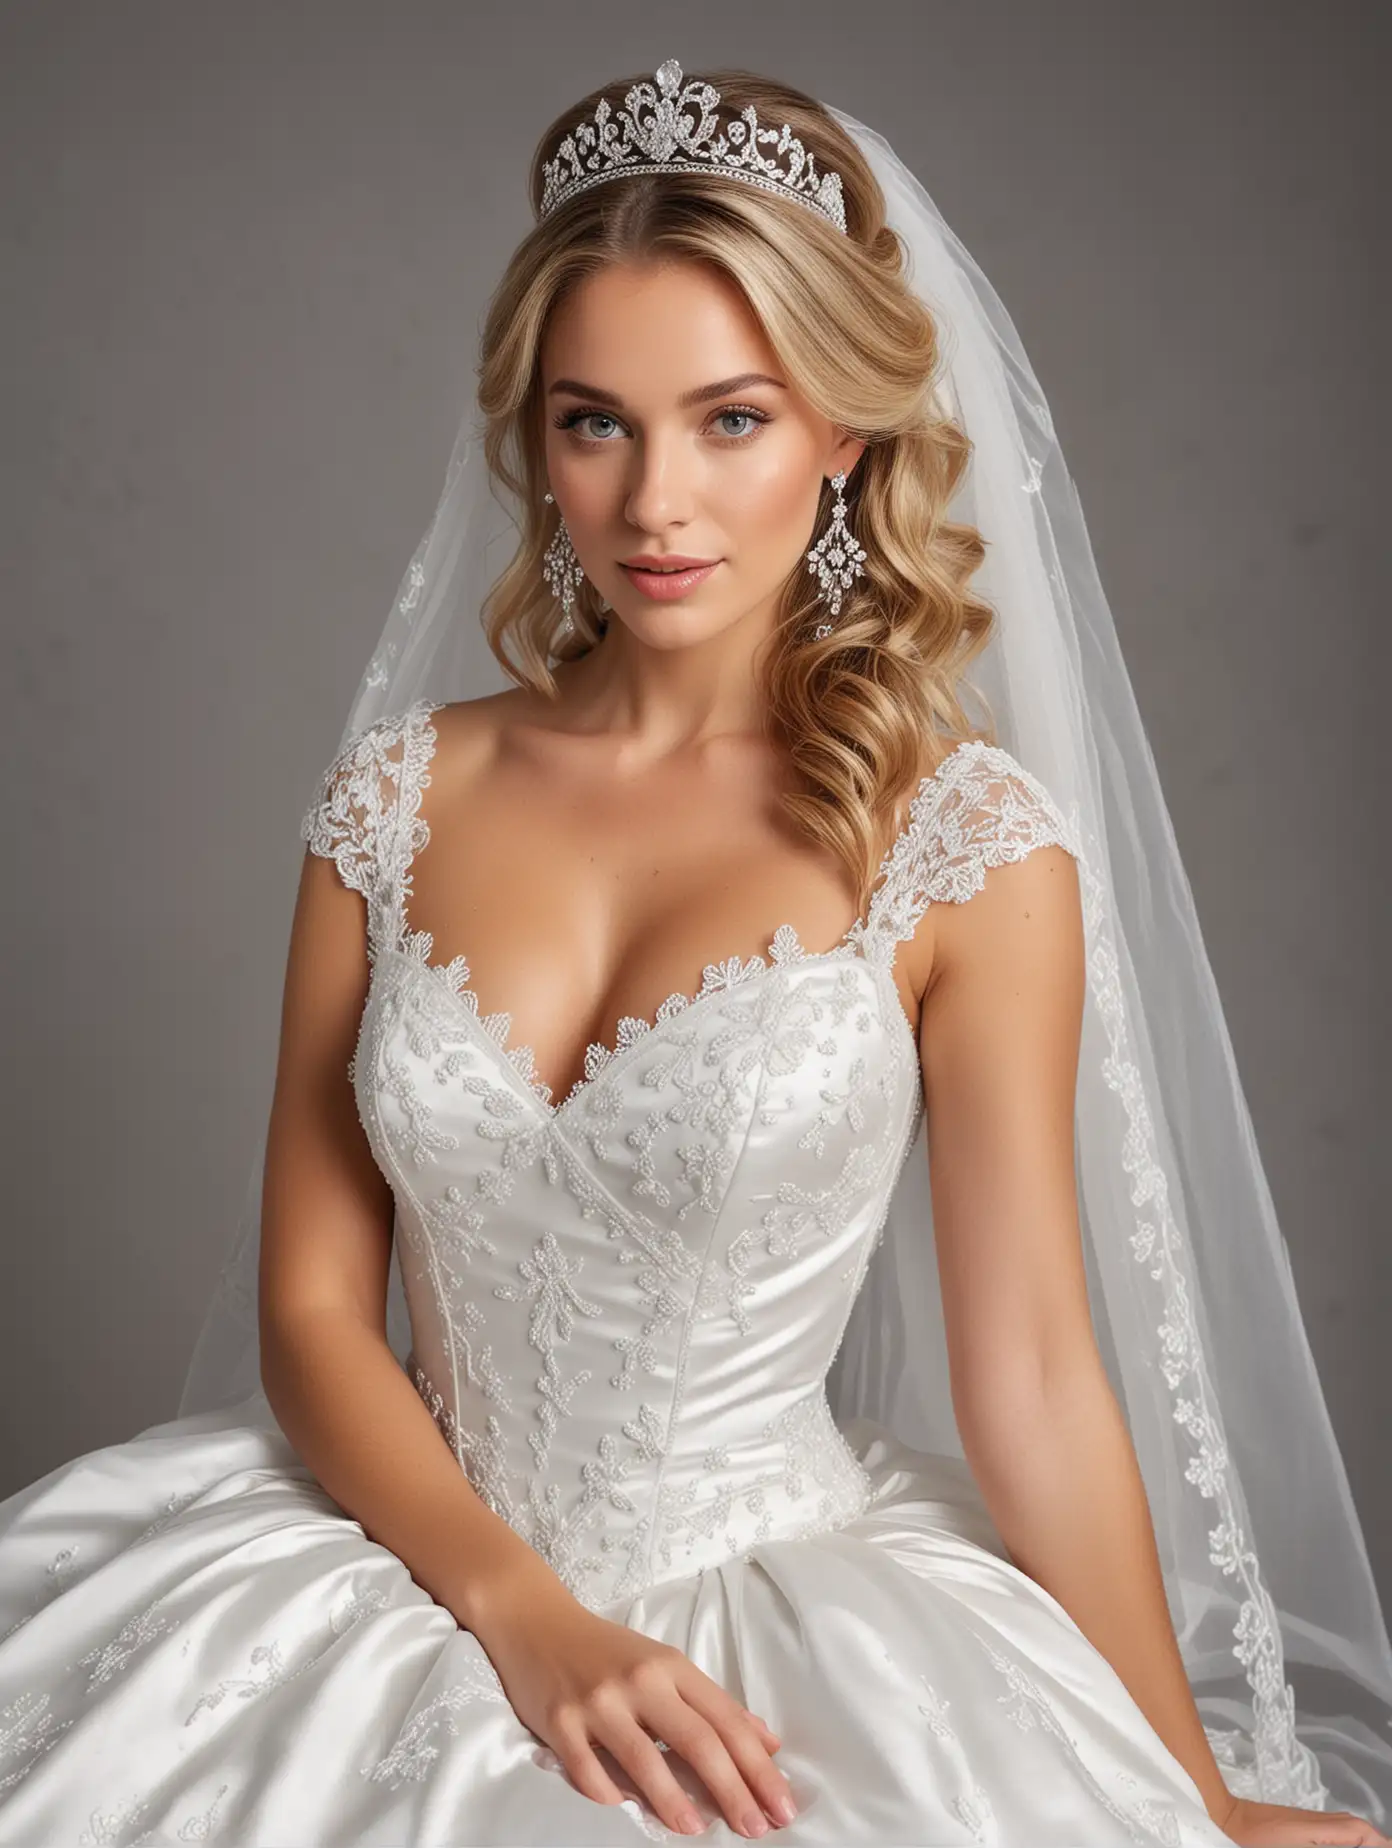 Elegant Bride in Lace Wedding Dress with Diamond Accessories